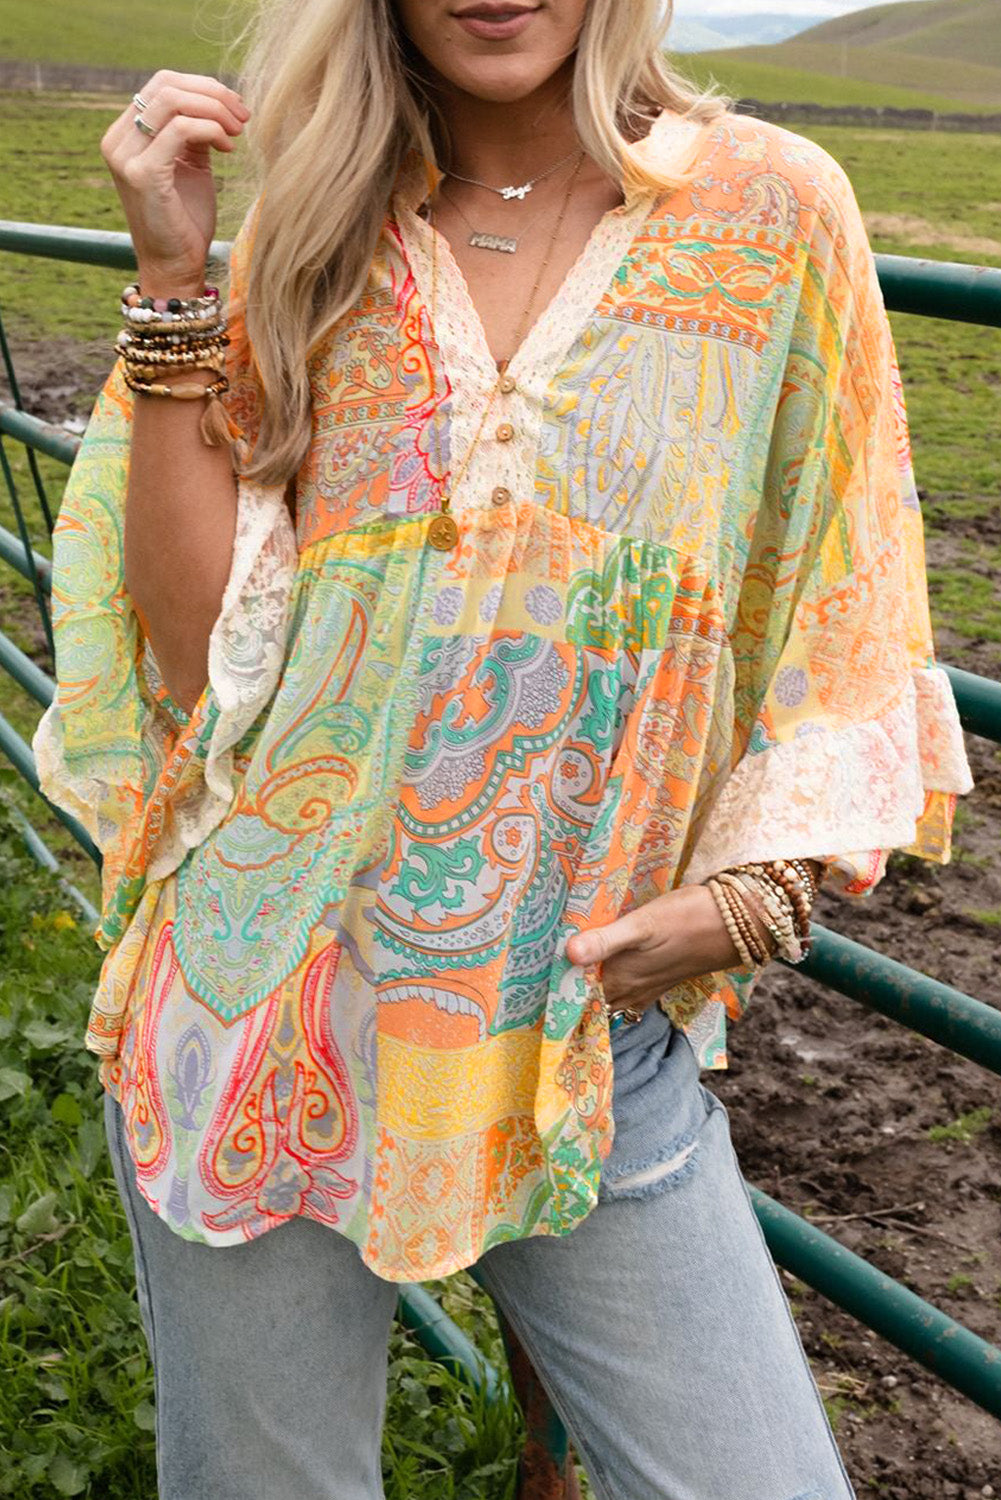 Cali Chic Multicolor Paisley Print Bell Sleeve Lace V-Neck Button Sheer Blouse